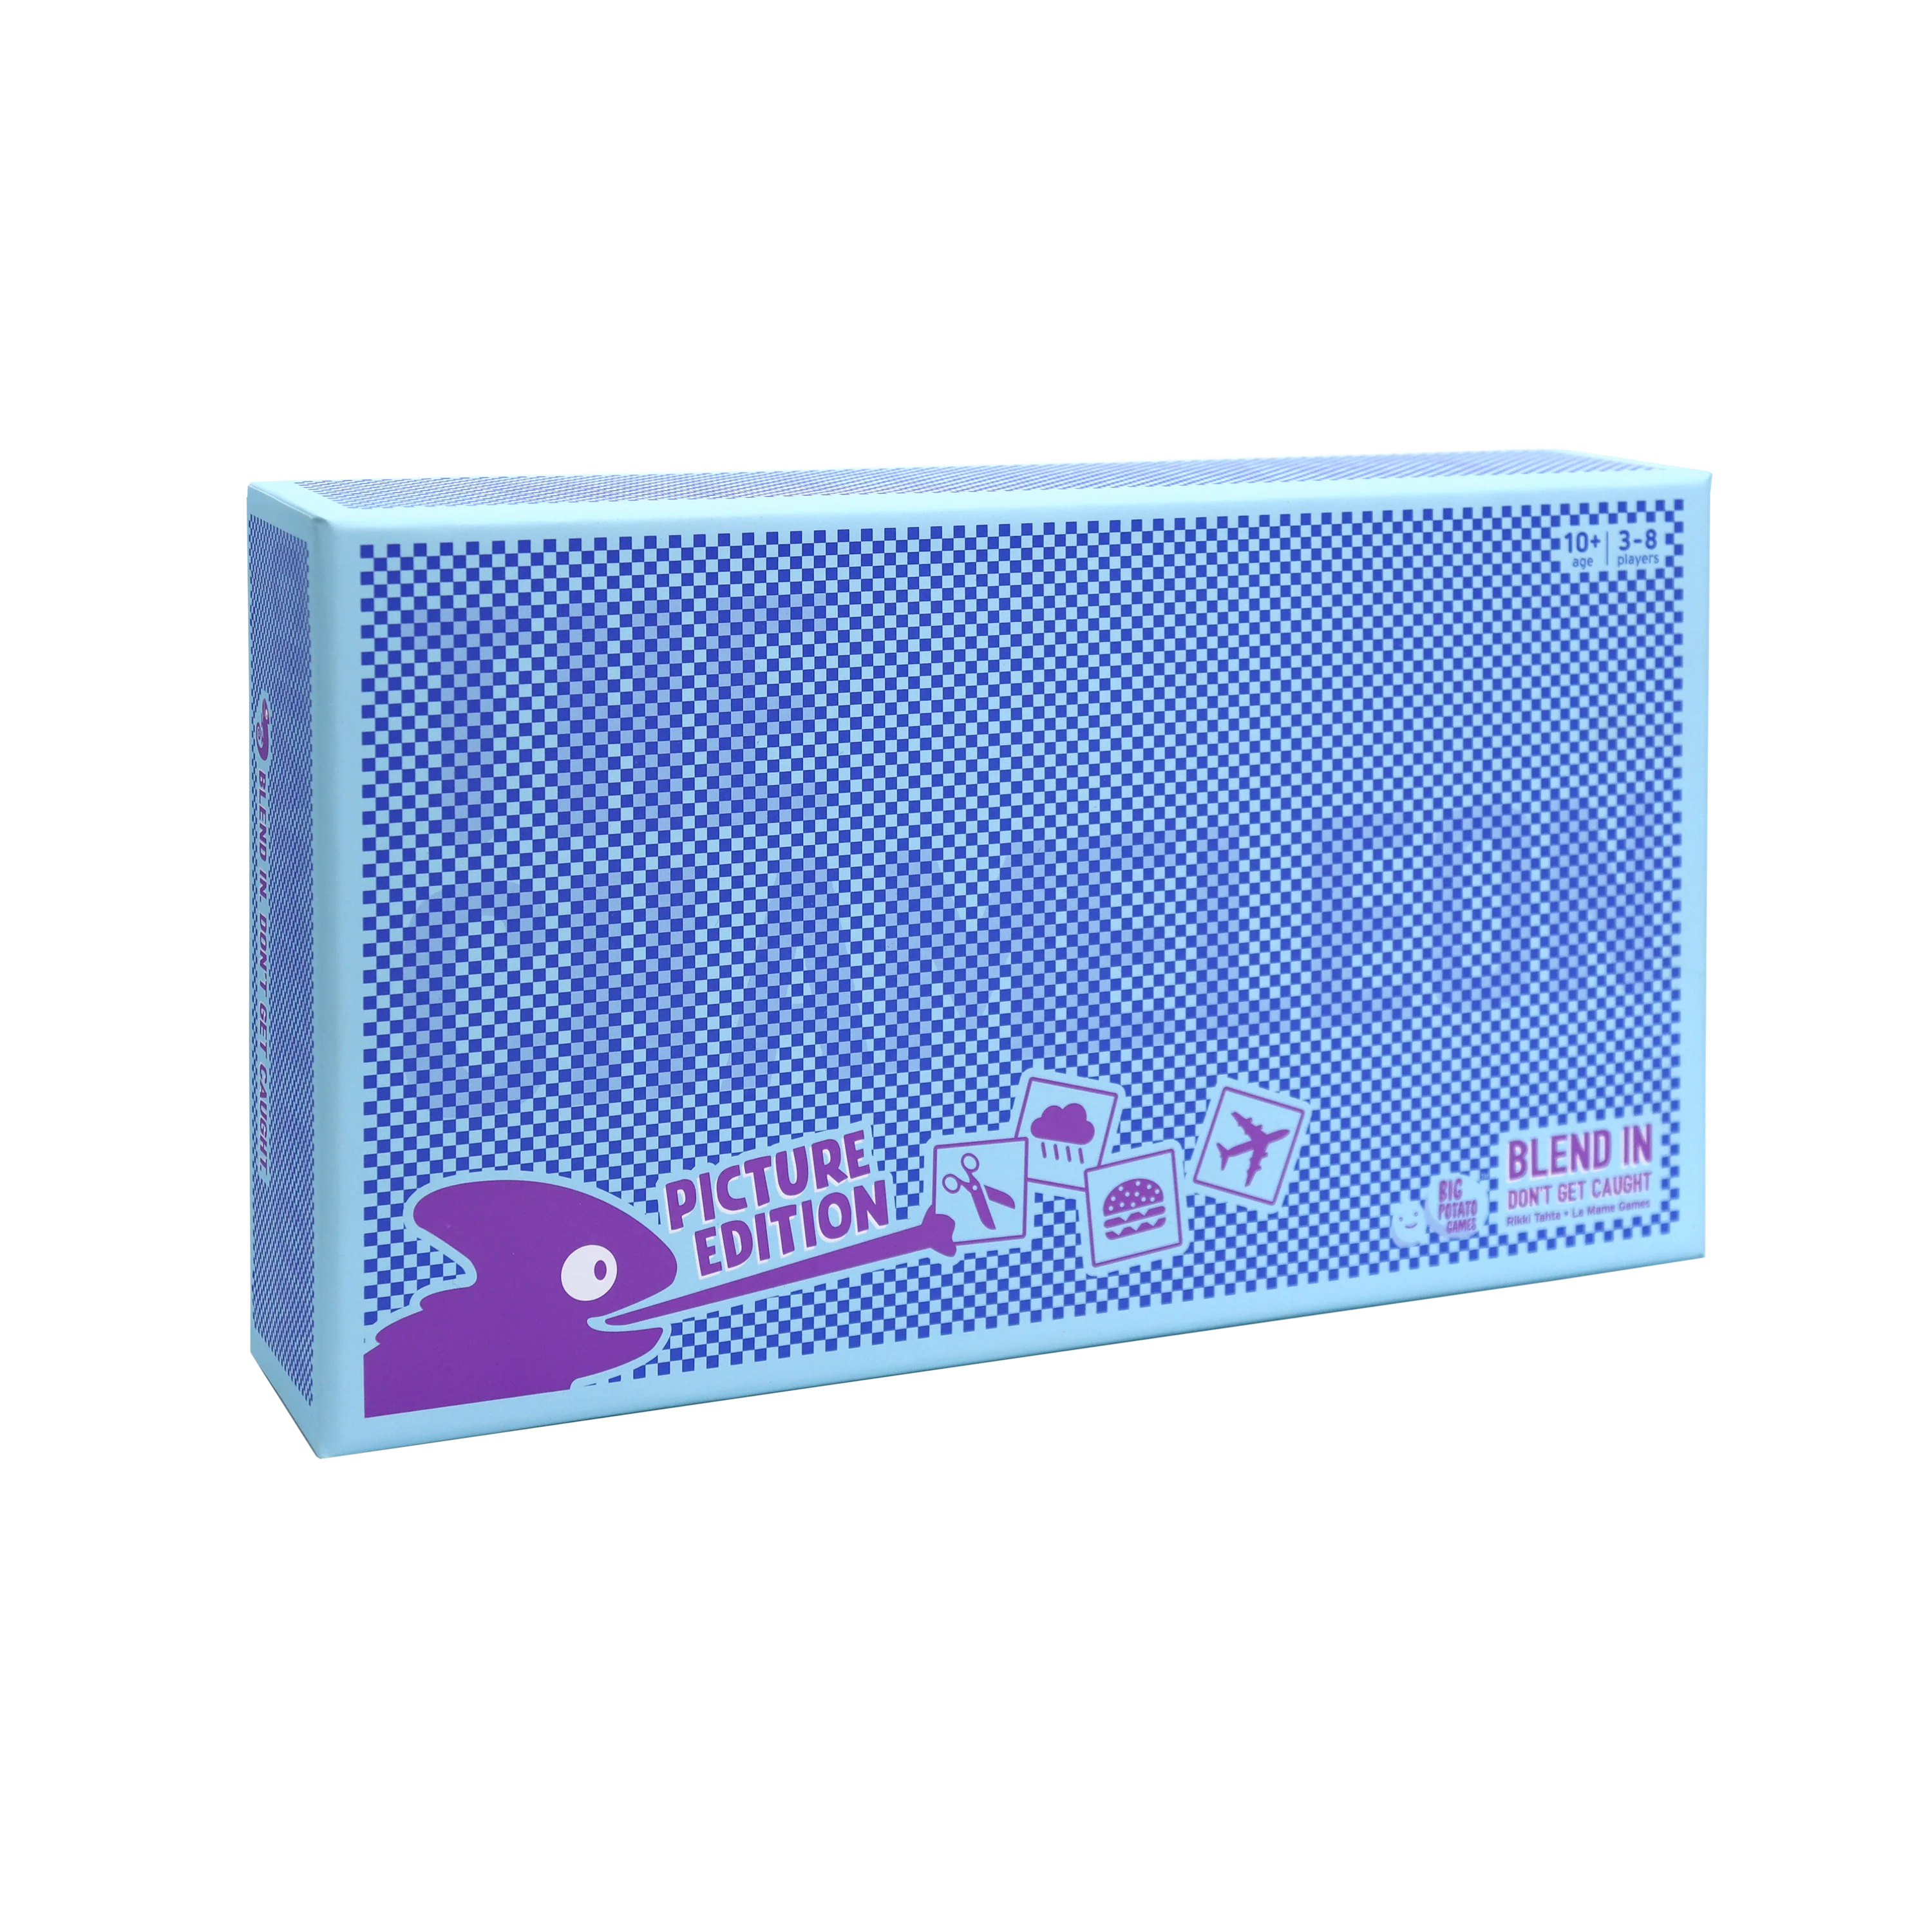 The Chameleon: Picture Edition [New] | Yard's Games Ltd